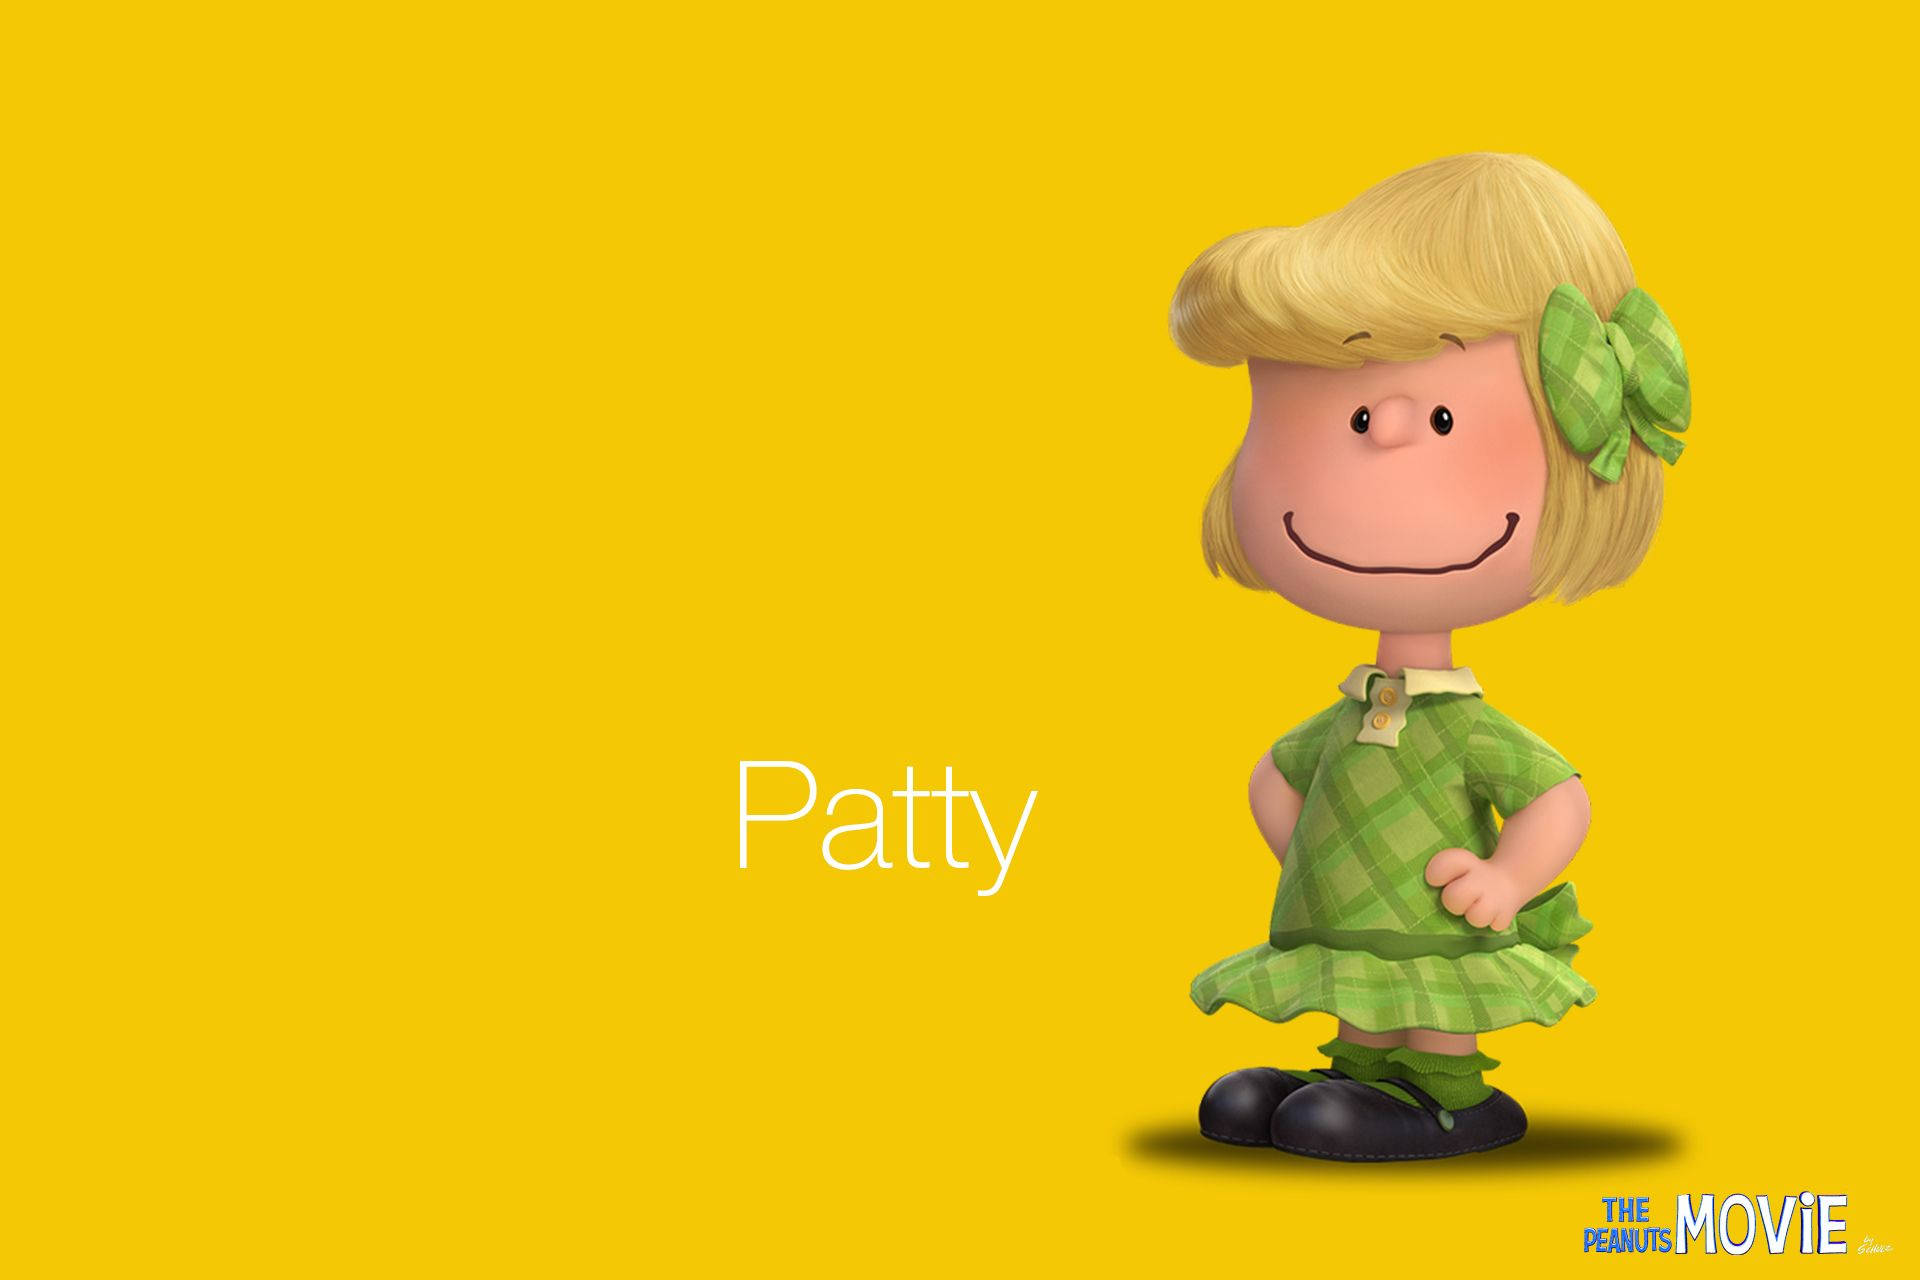 Patty From The Peanuts Movie